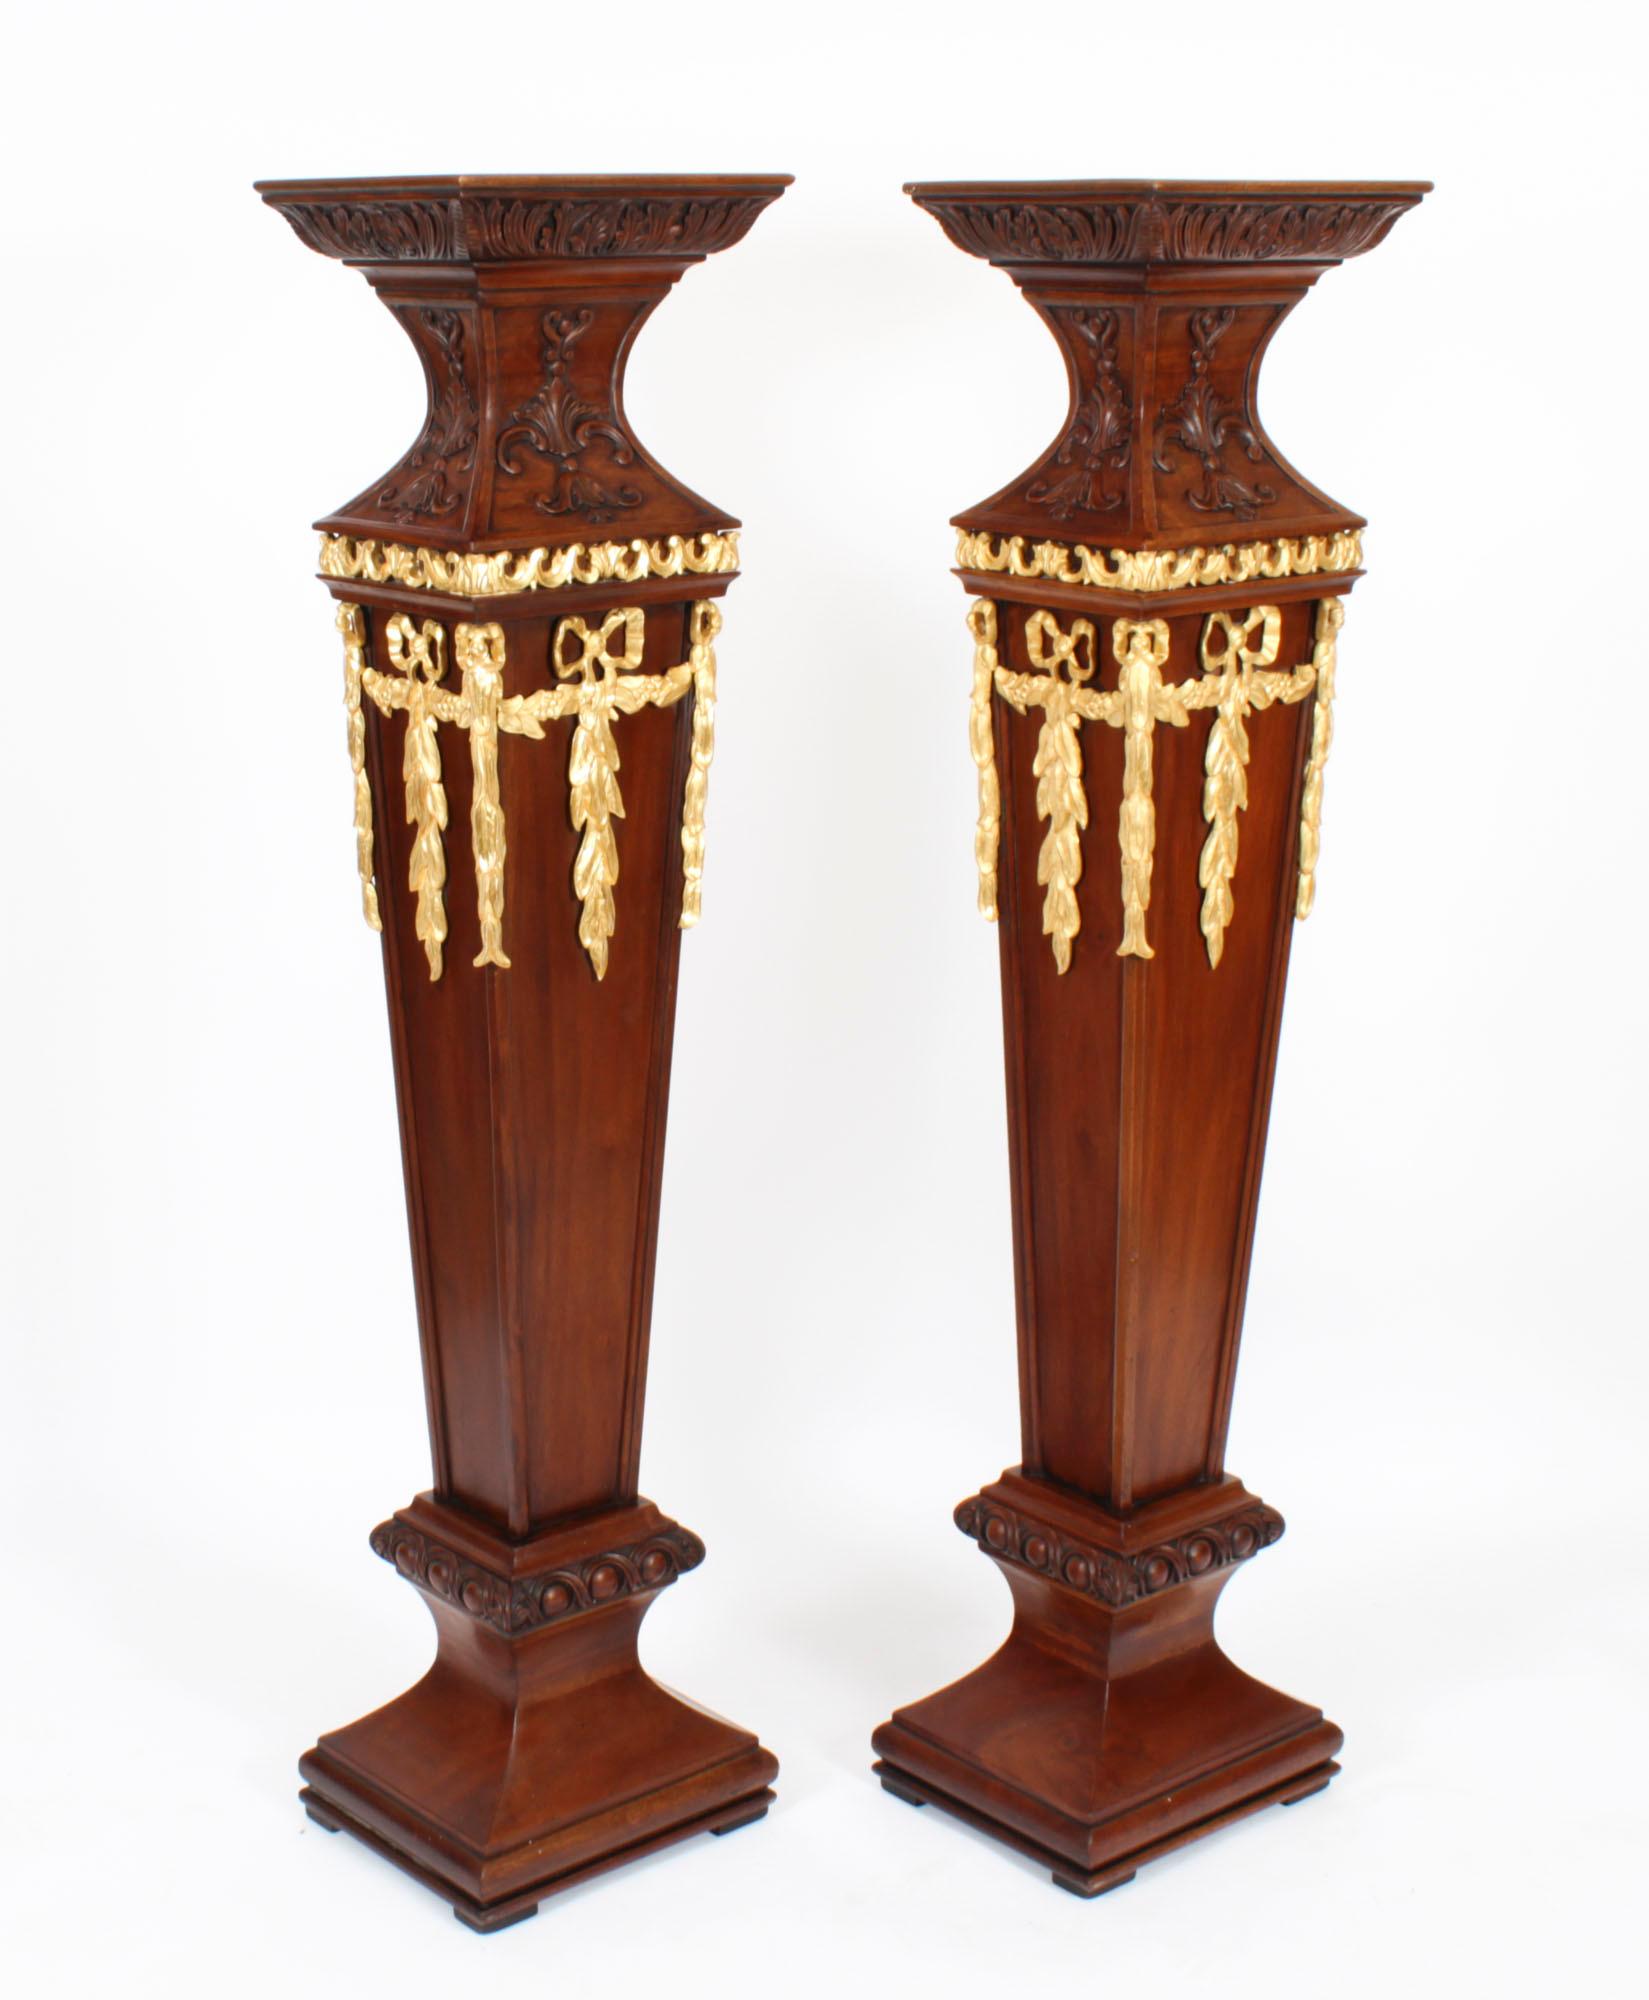 English Antique Pair of Edwardian Mahogany Pedestals Torchere Stands Early 20th Century For Sale